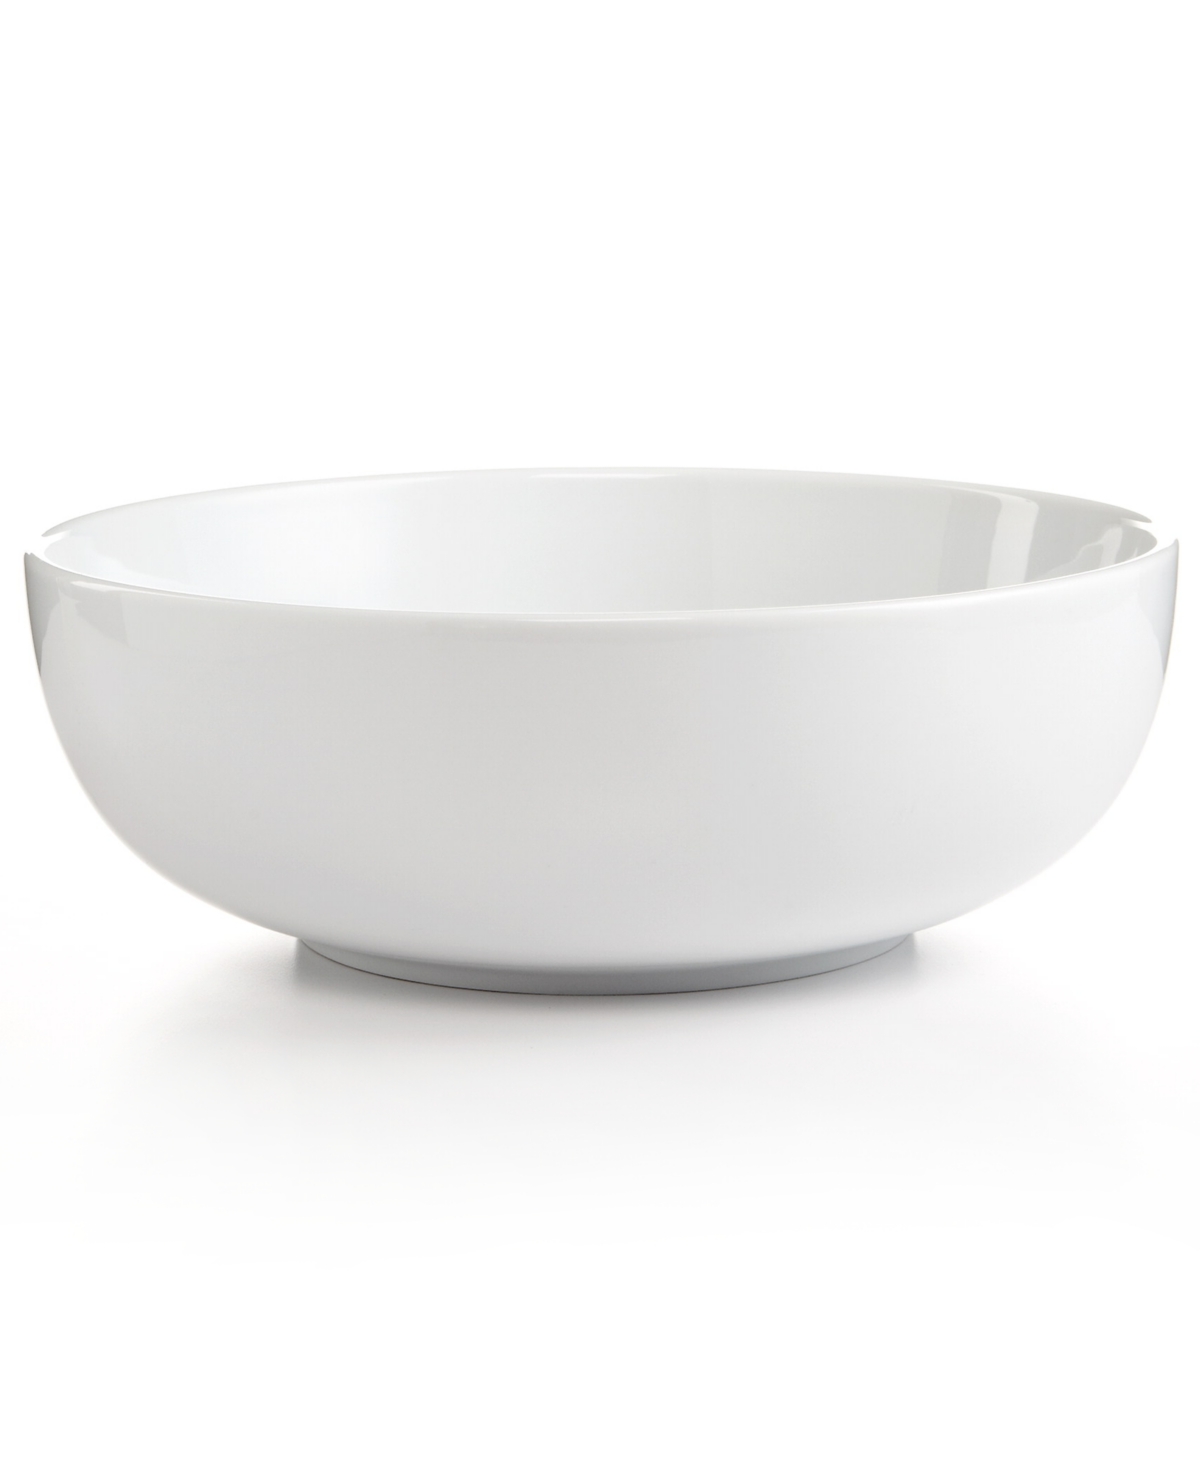 Whiteware 11.5" Large Round Serving Bowl, Created for Macy's